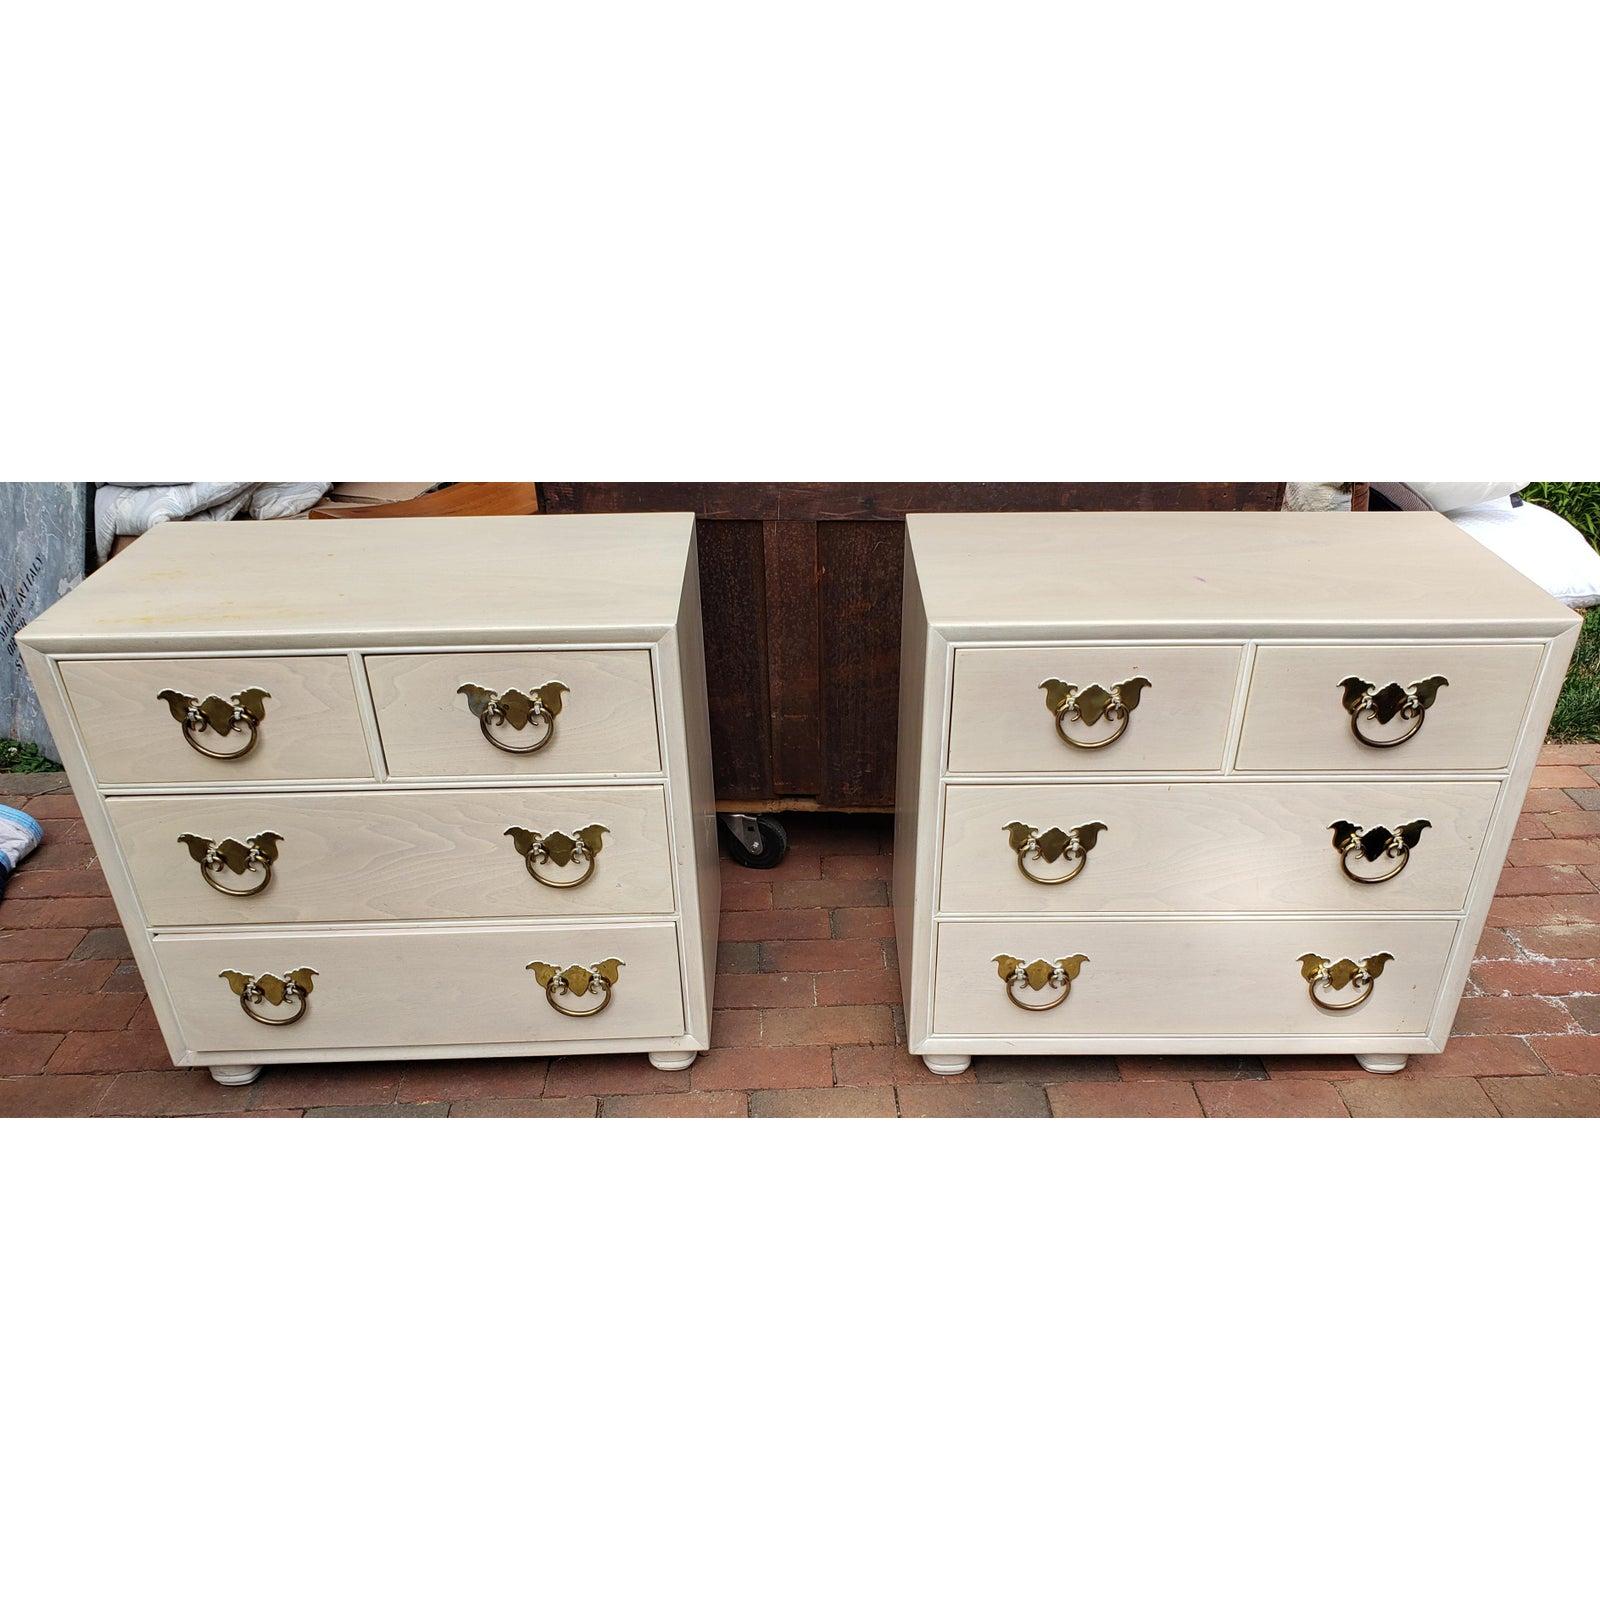 1970s Henredon American Asian Inspired Bachelor Chests / Nightstands, a Pair 2